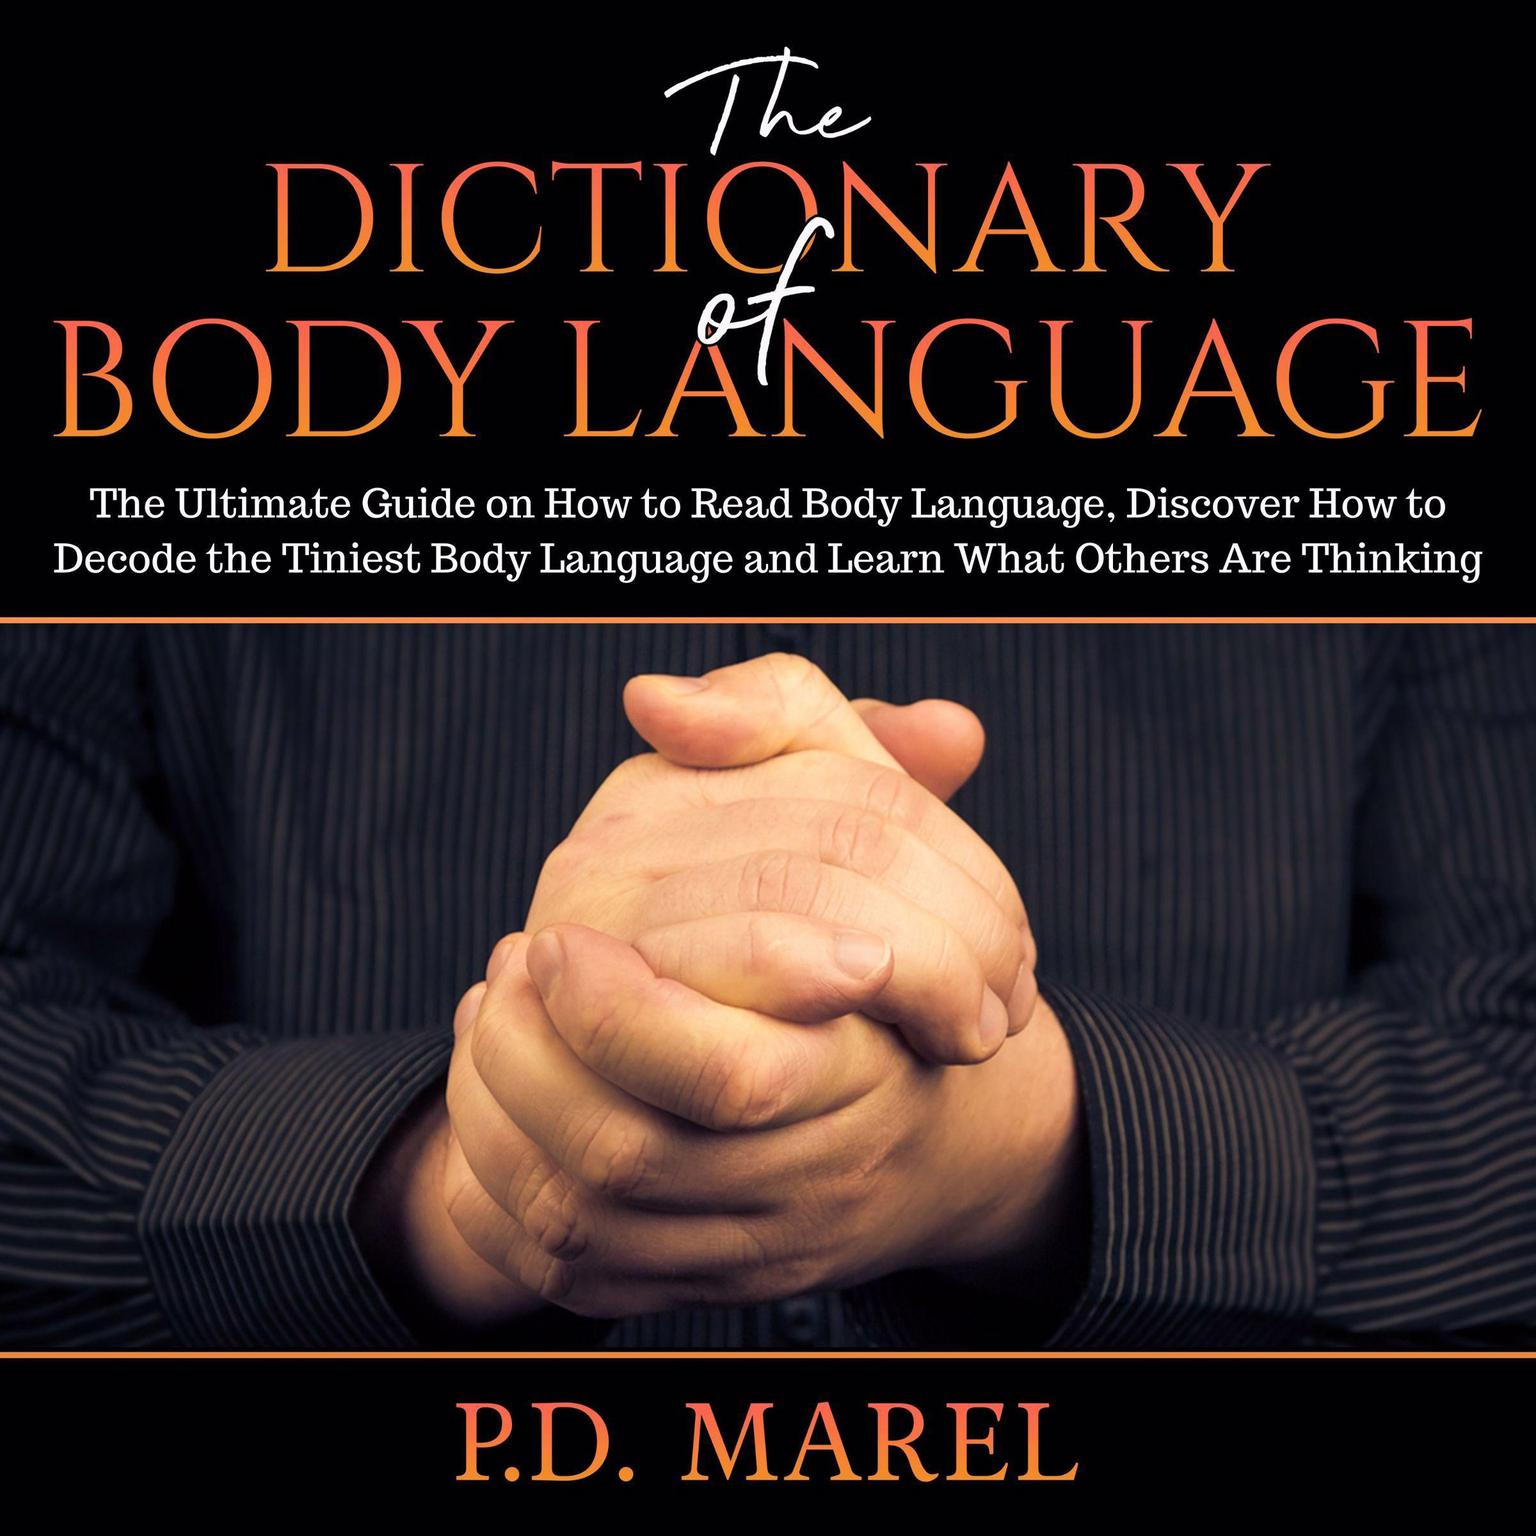 The Dictionary of Body Language: The Ultimate Guide on How to Read Body Language, Discover How to Decode the Tiniest Body Language and Learn What Others Are Thinking Audiobook, by P.D. Marel